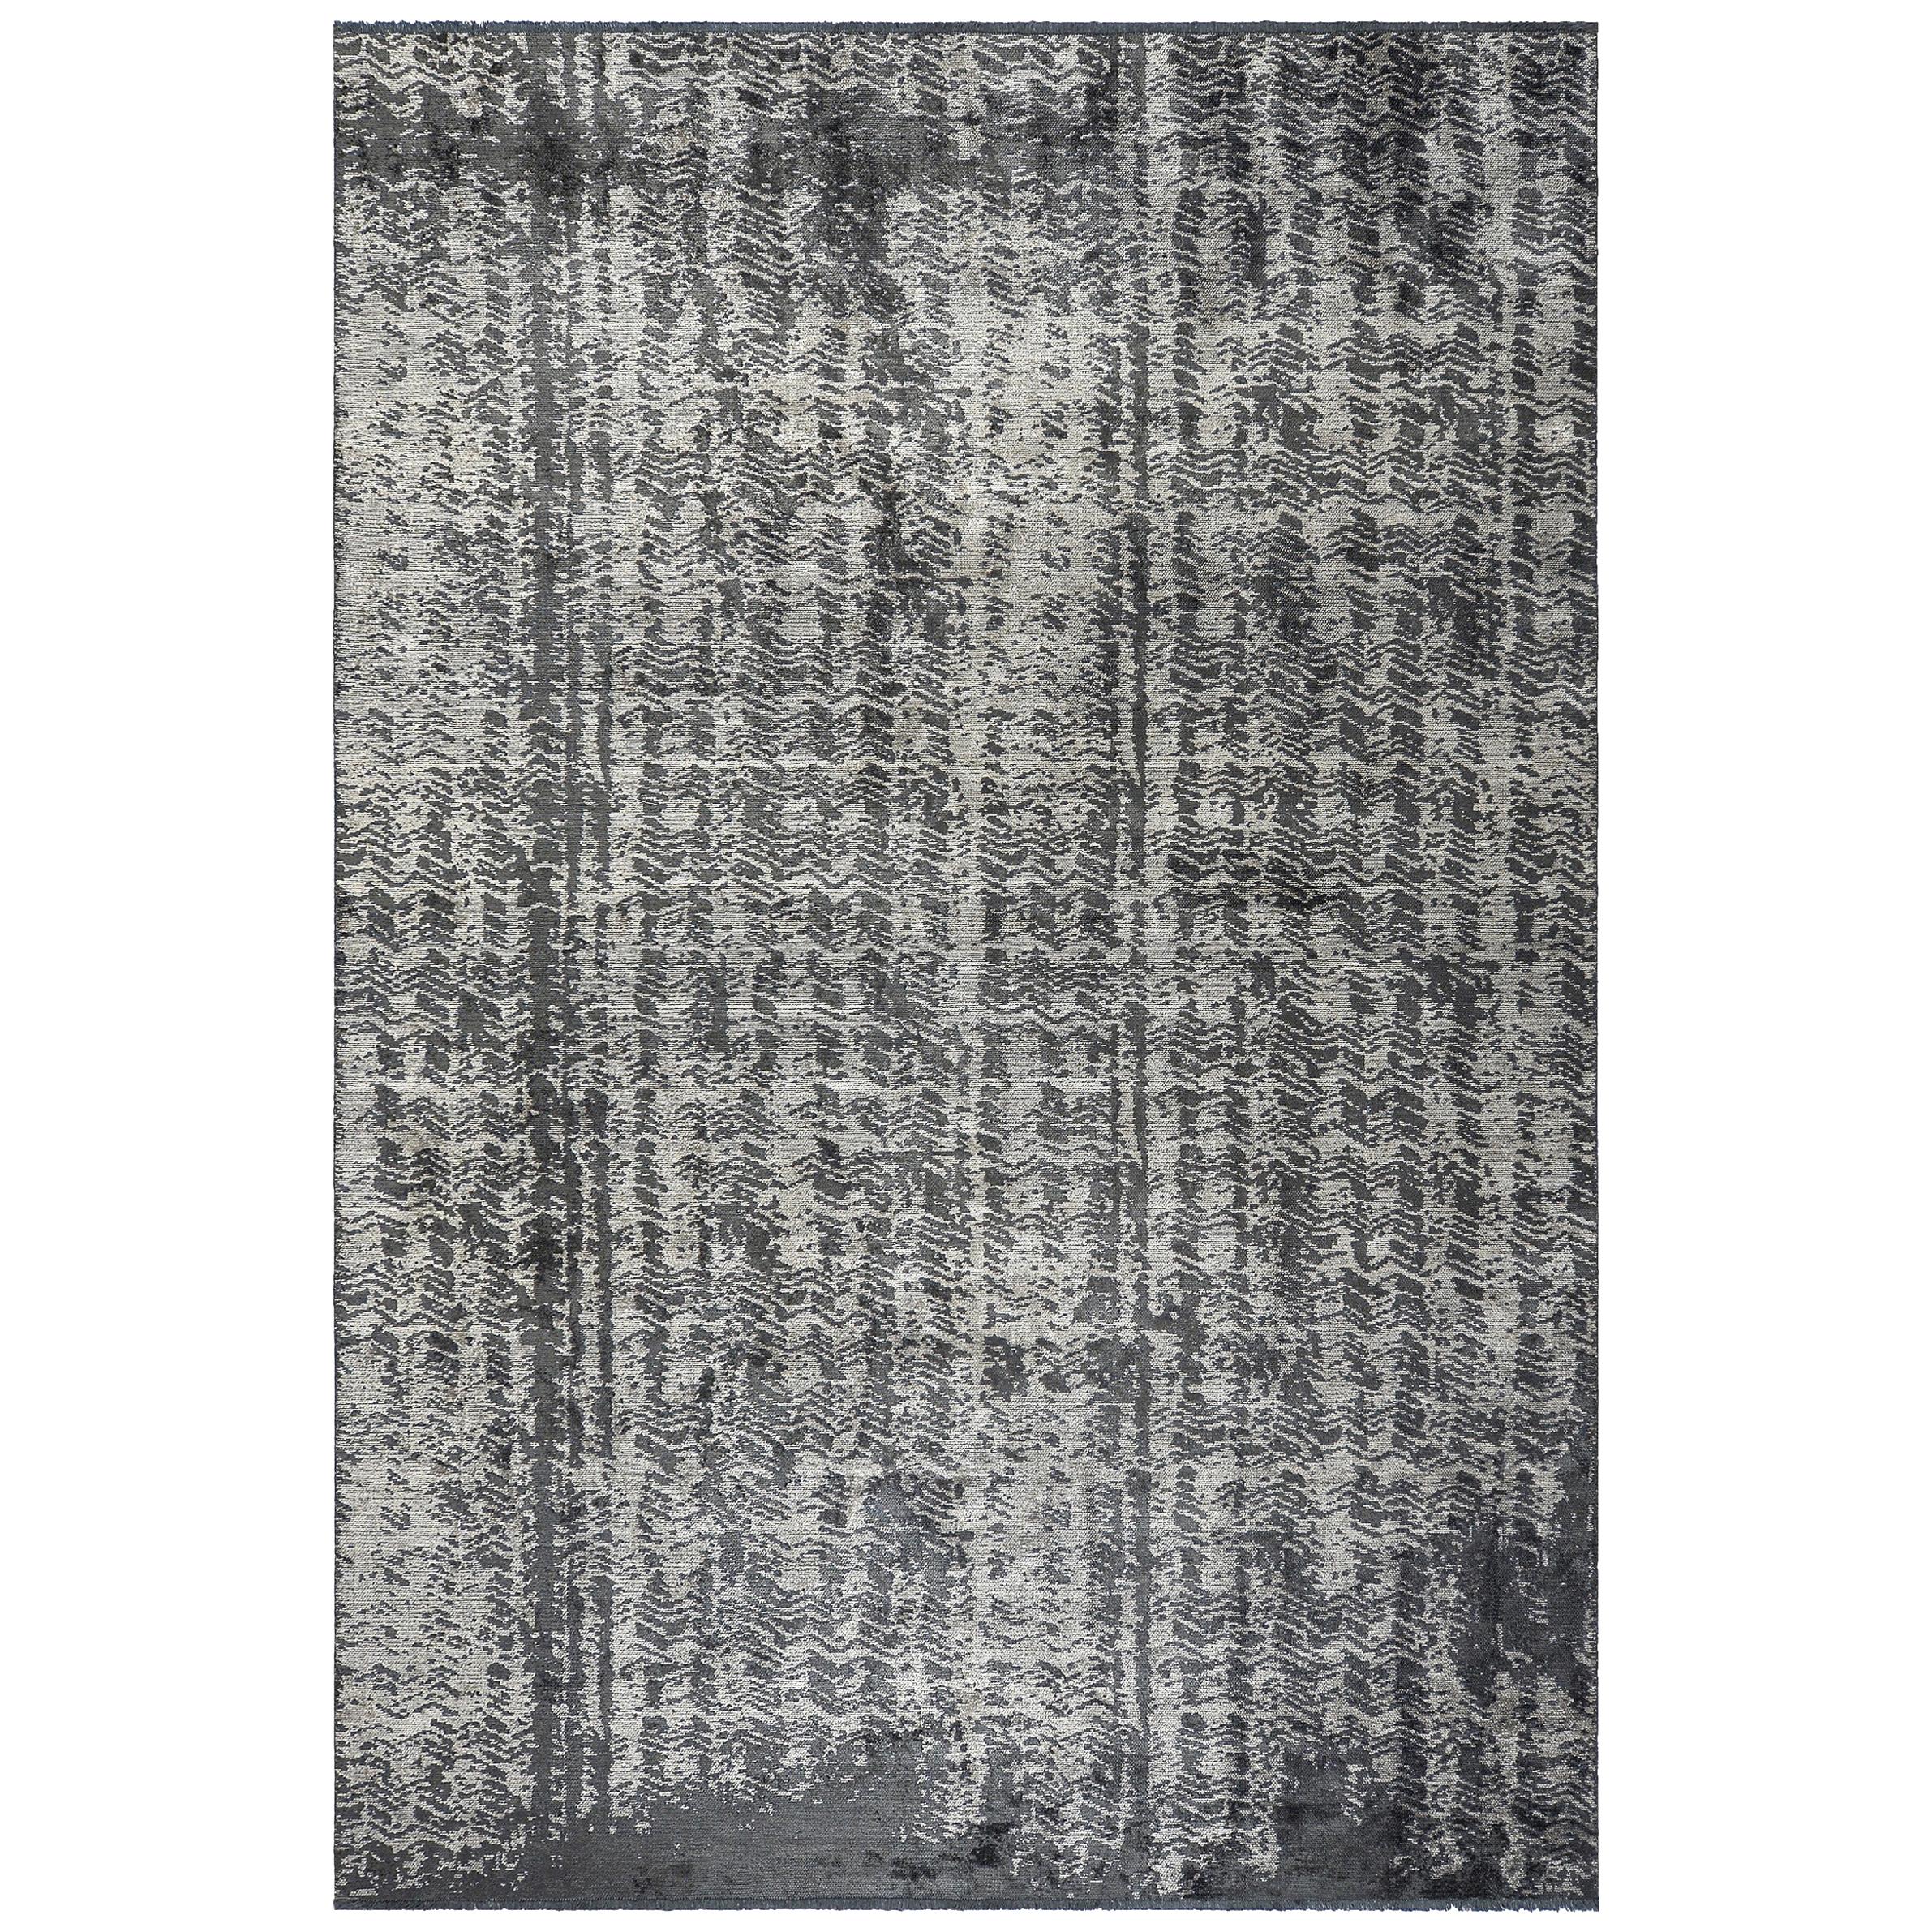 Beige, Grey, Medium Gray, and Charcoal Abstract Pattern Rug with Shine